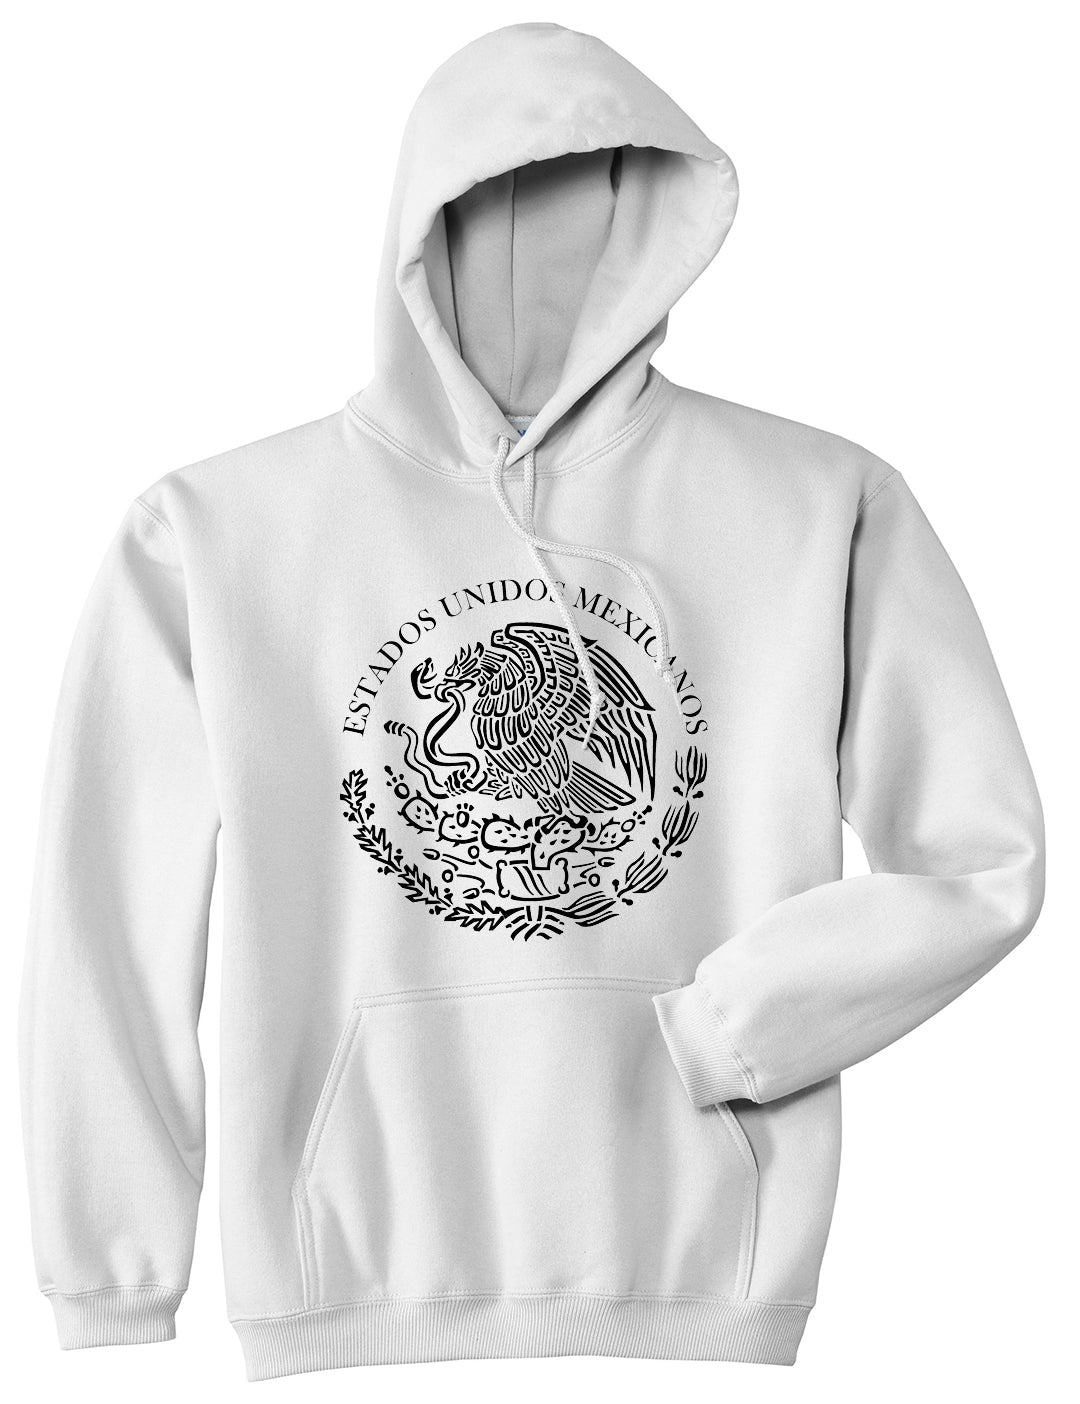 Mexico Coat Of Arms Black White Mens Pullover Hoodie White